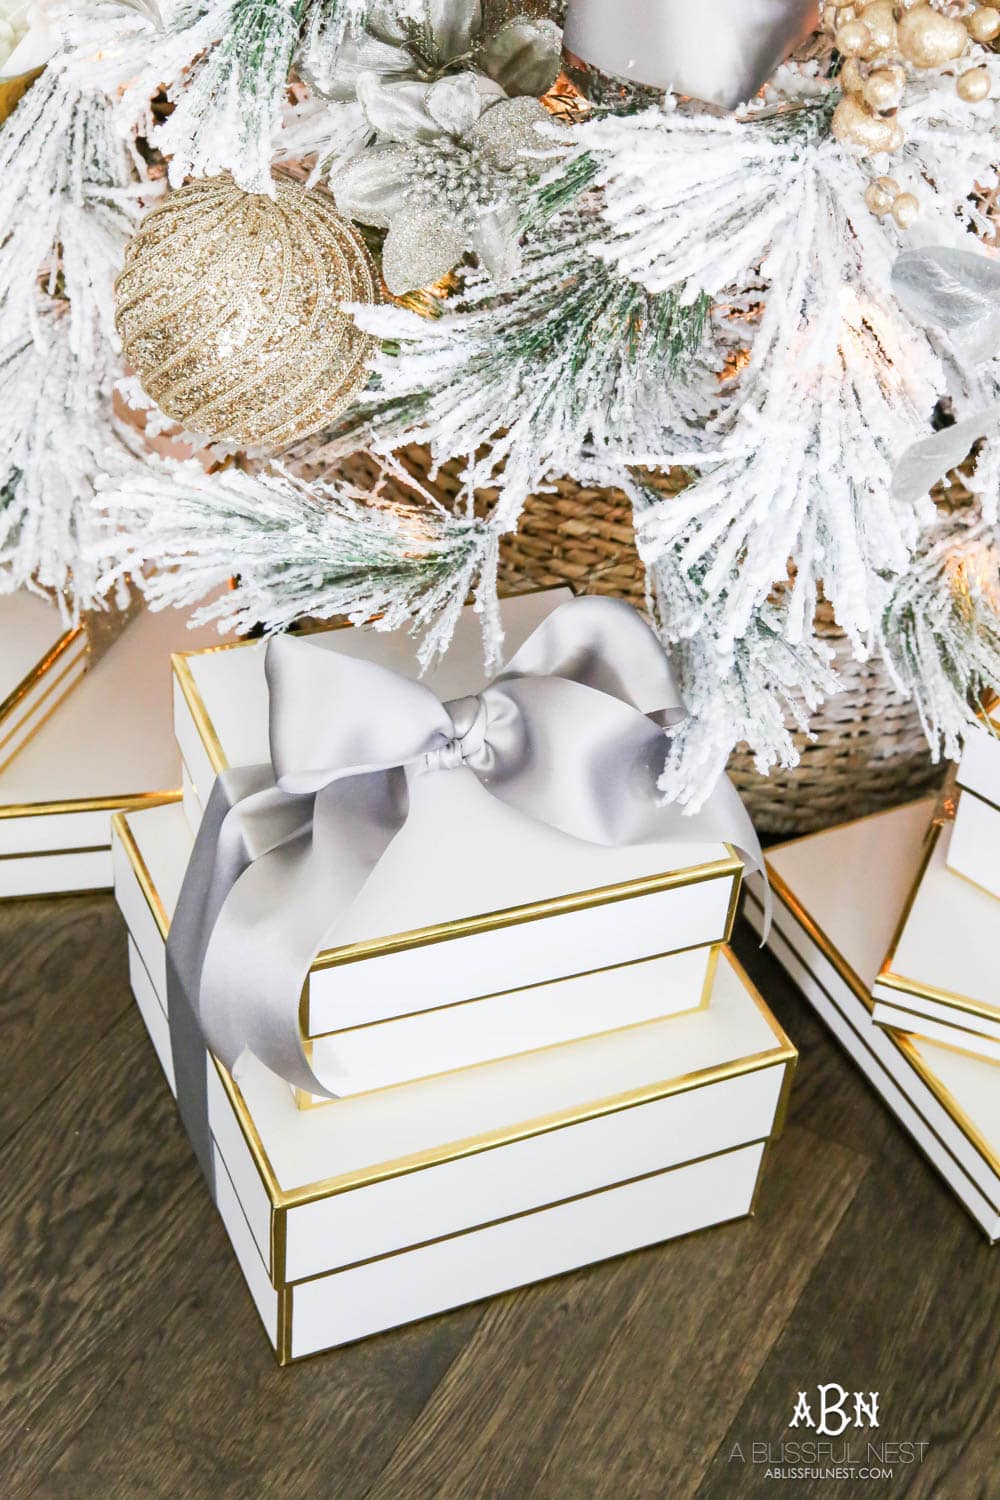 White boxes with gold trim make the perfect wrapping for gifts under this white flocked tree with silver and gold accents. Check out all the white, silver and gold Christmas decor in this holiday home tour on ABlissfulNest.com. #ABlissfulNest #Christmasdecor #Christmasdecorating #CoastalChristmasdecor #christmastree